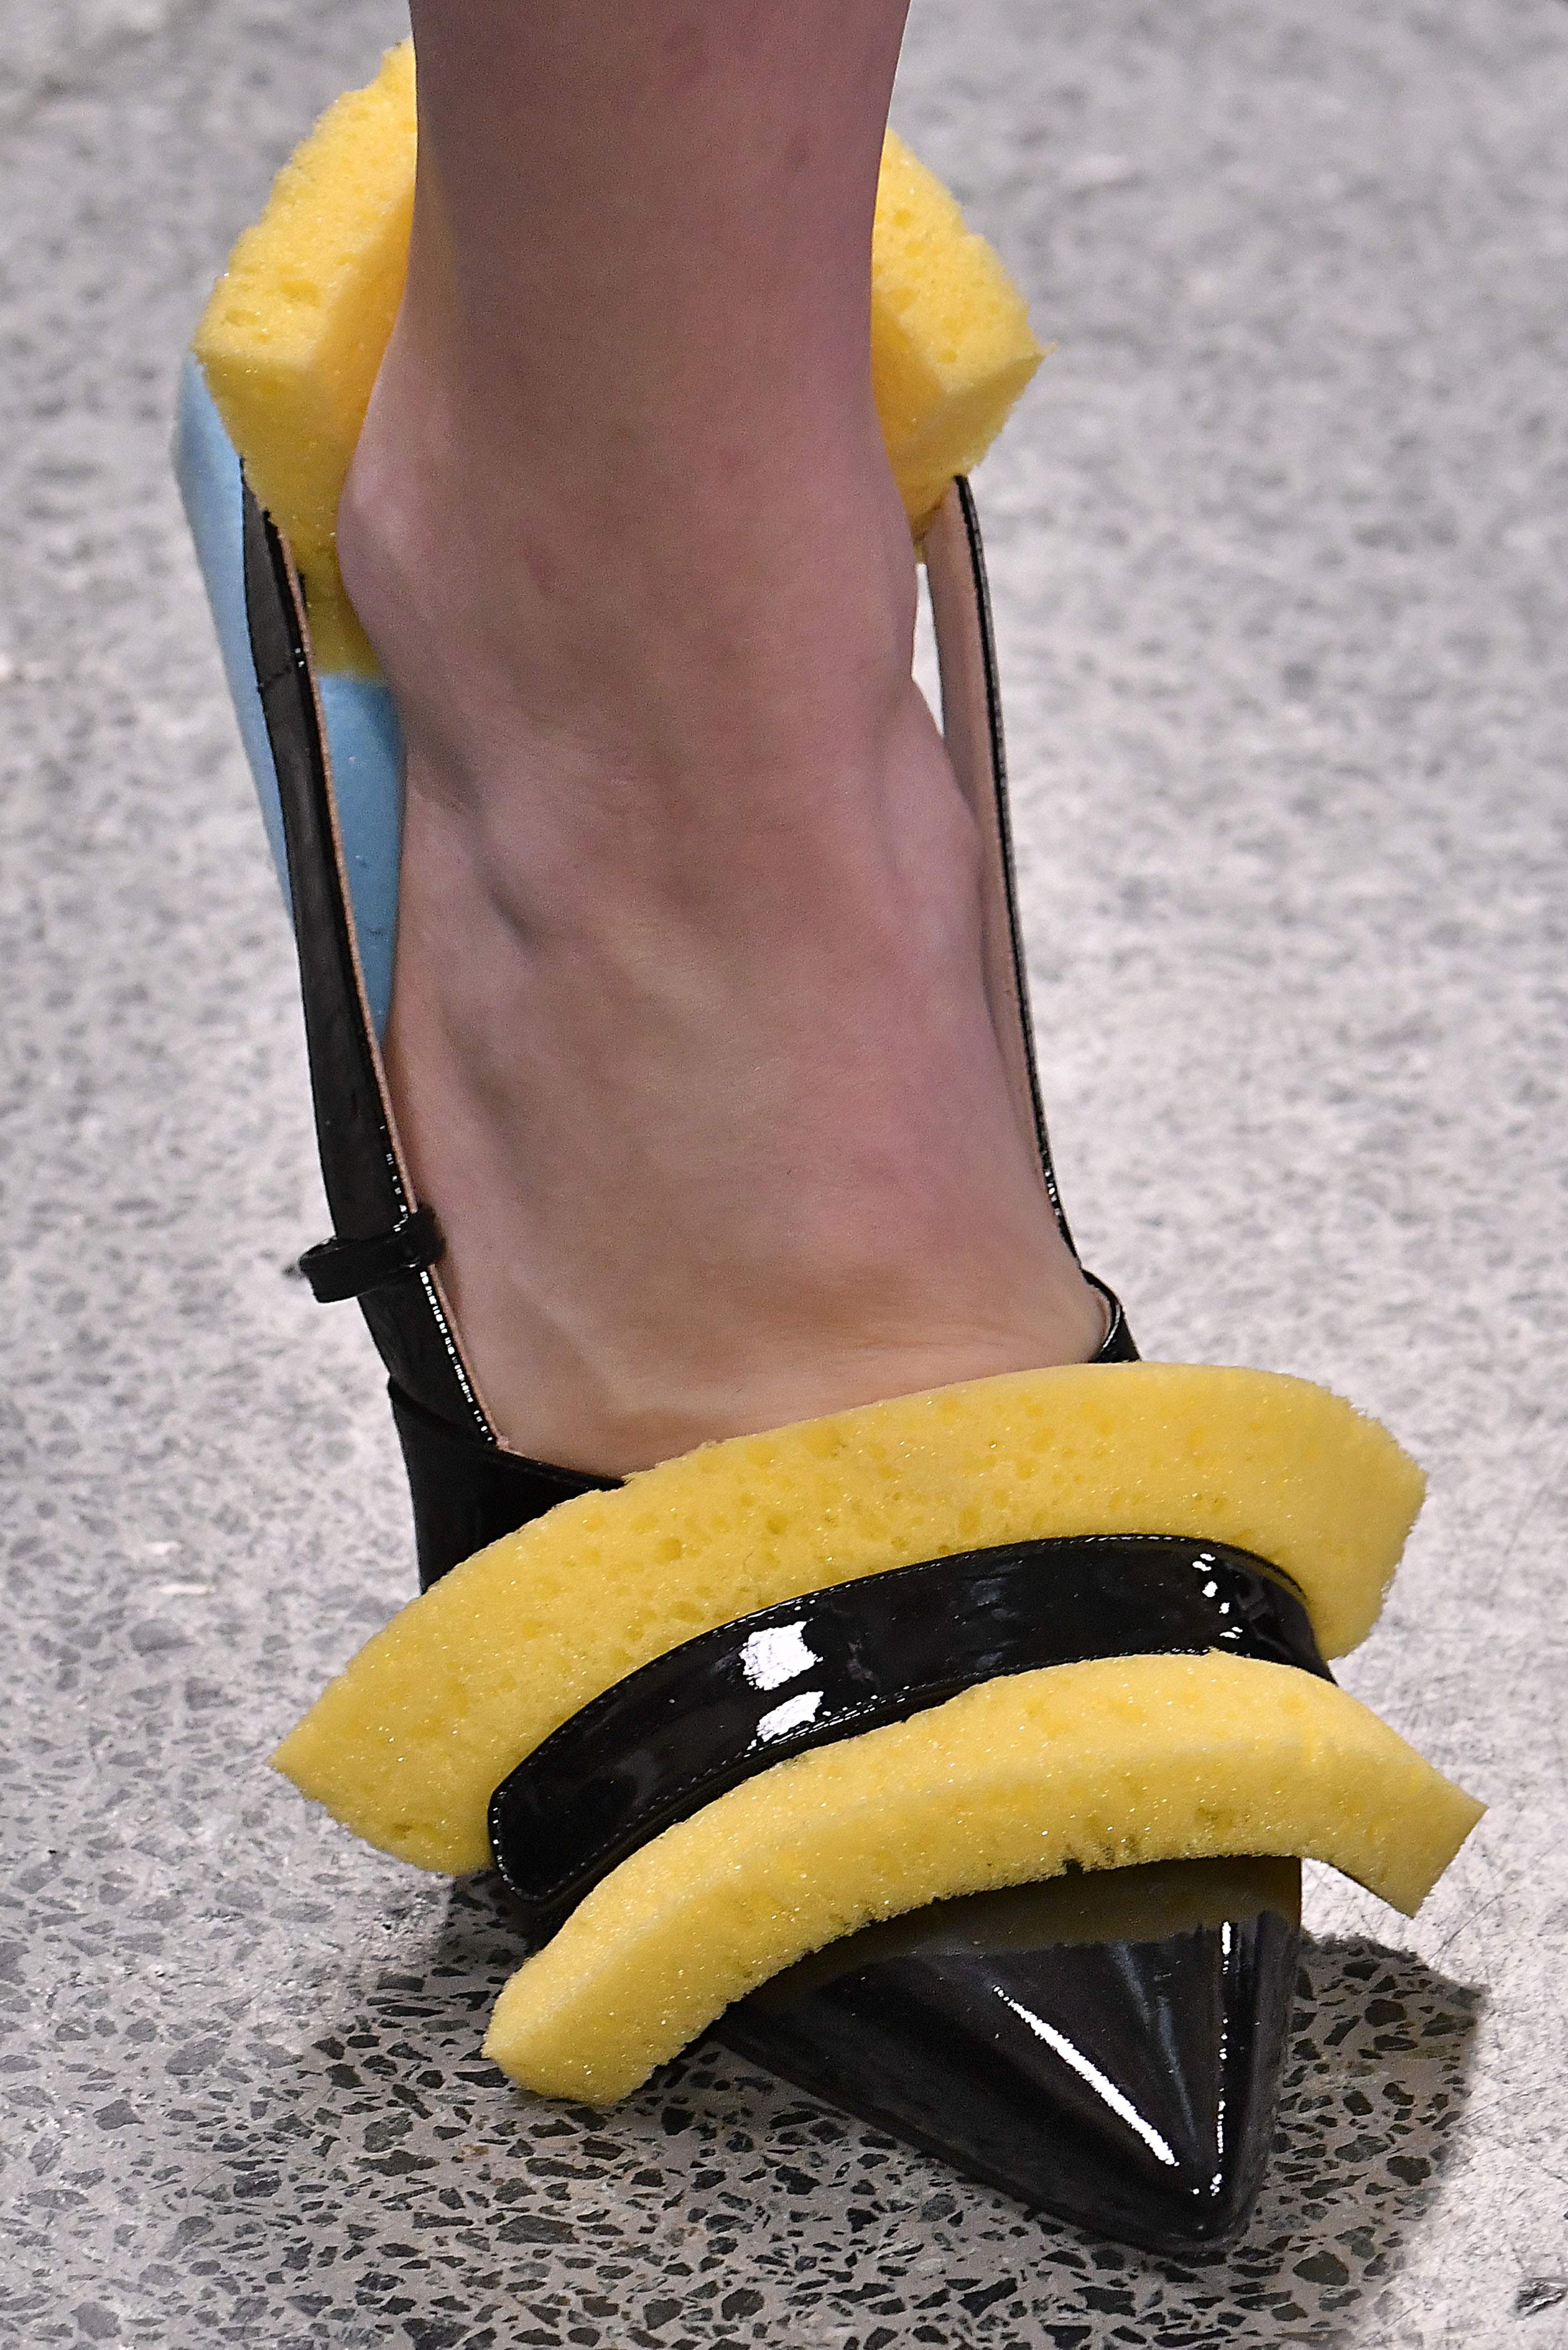 the most iconic fugly shoe hybrids in fashion history